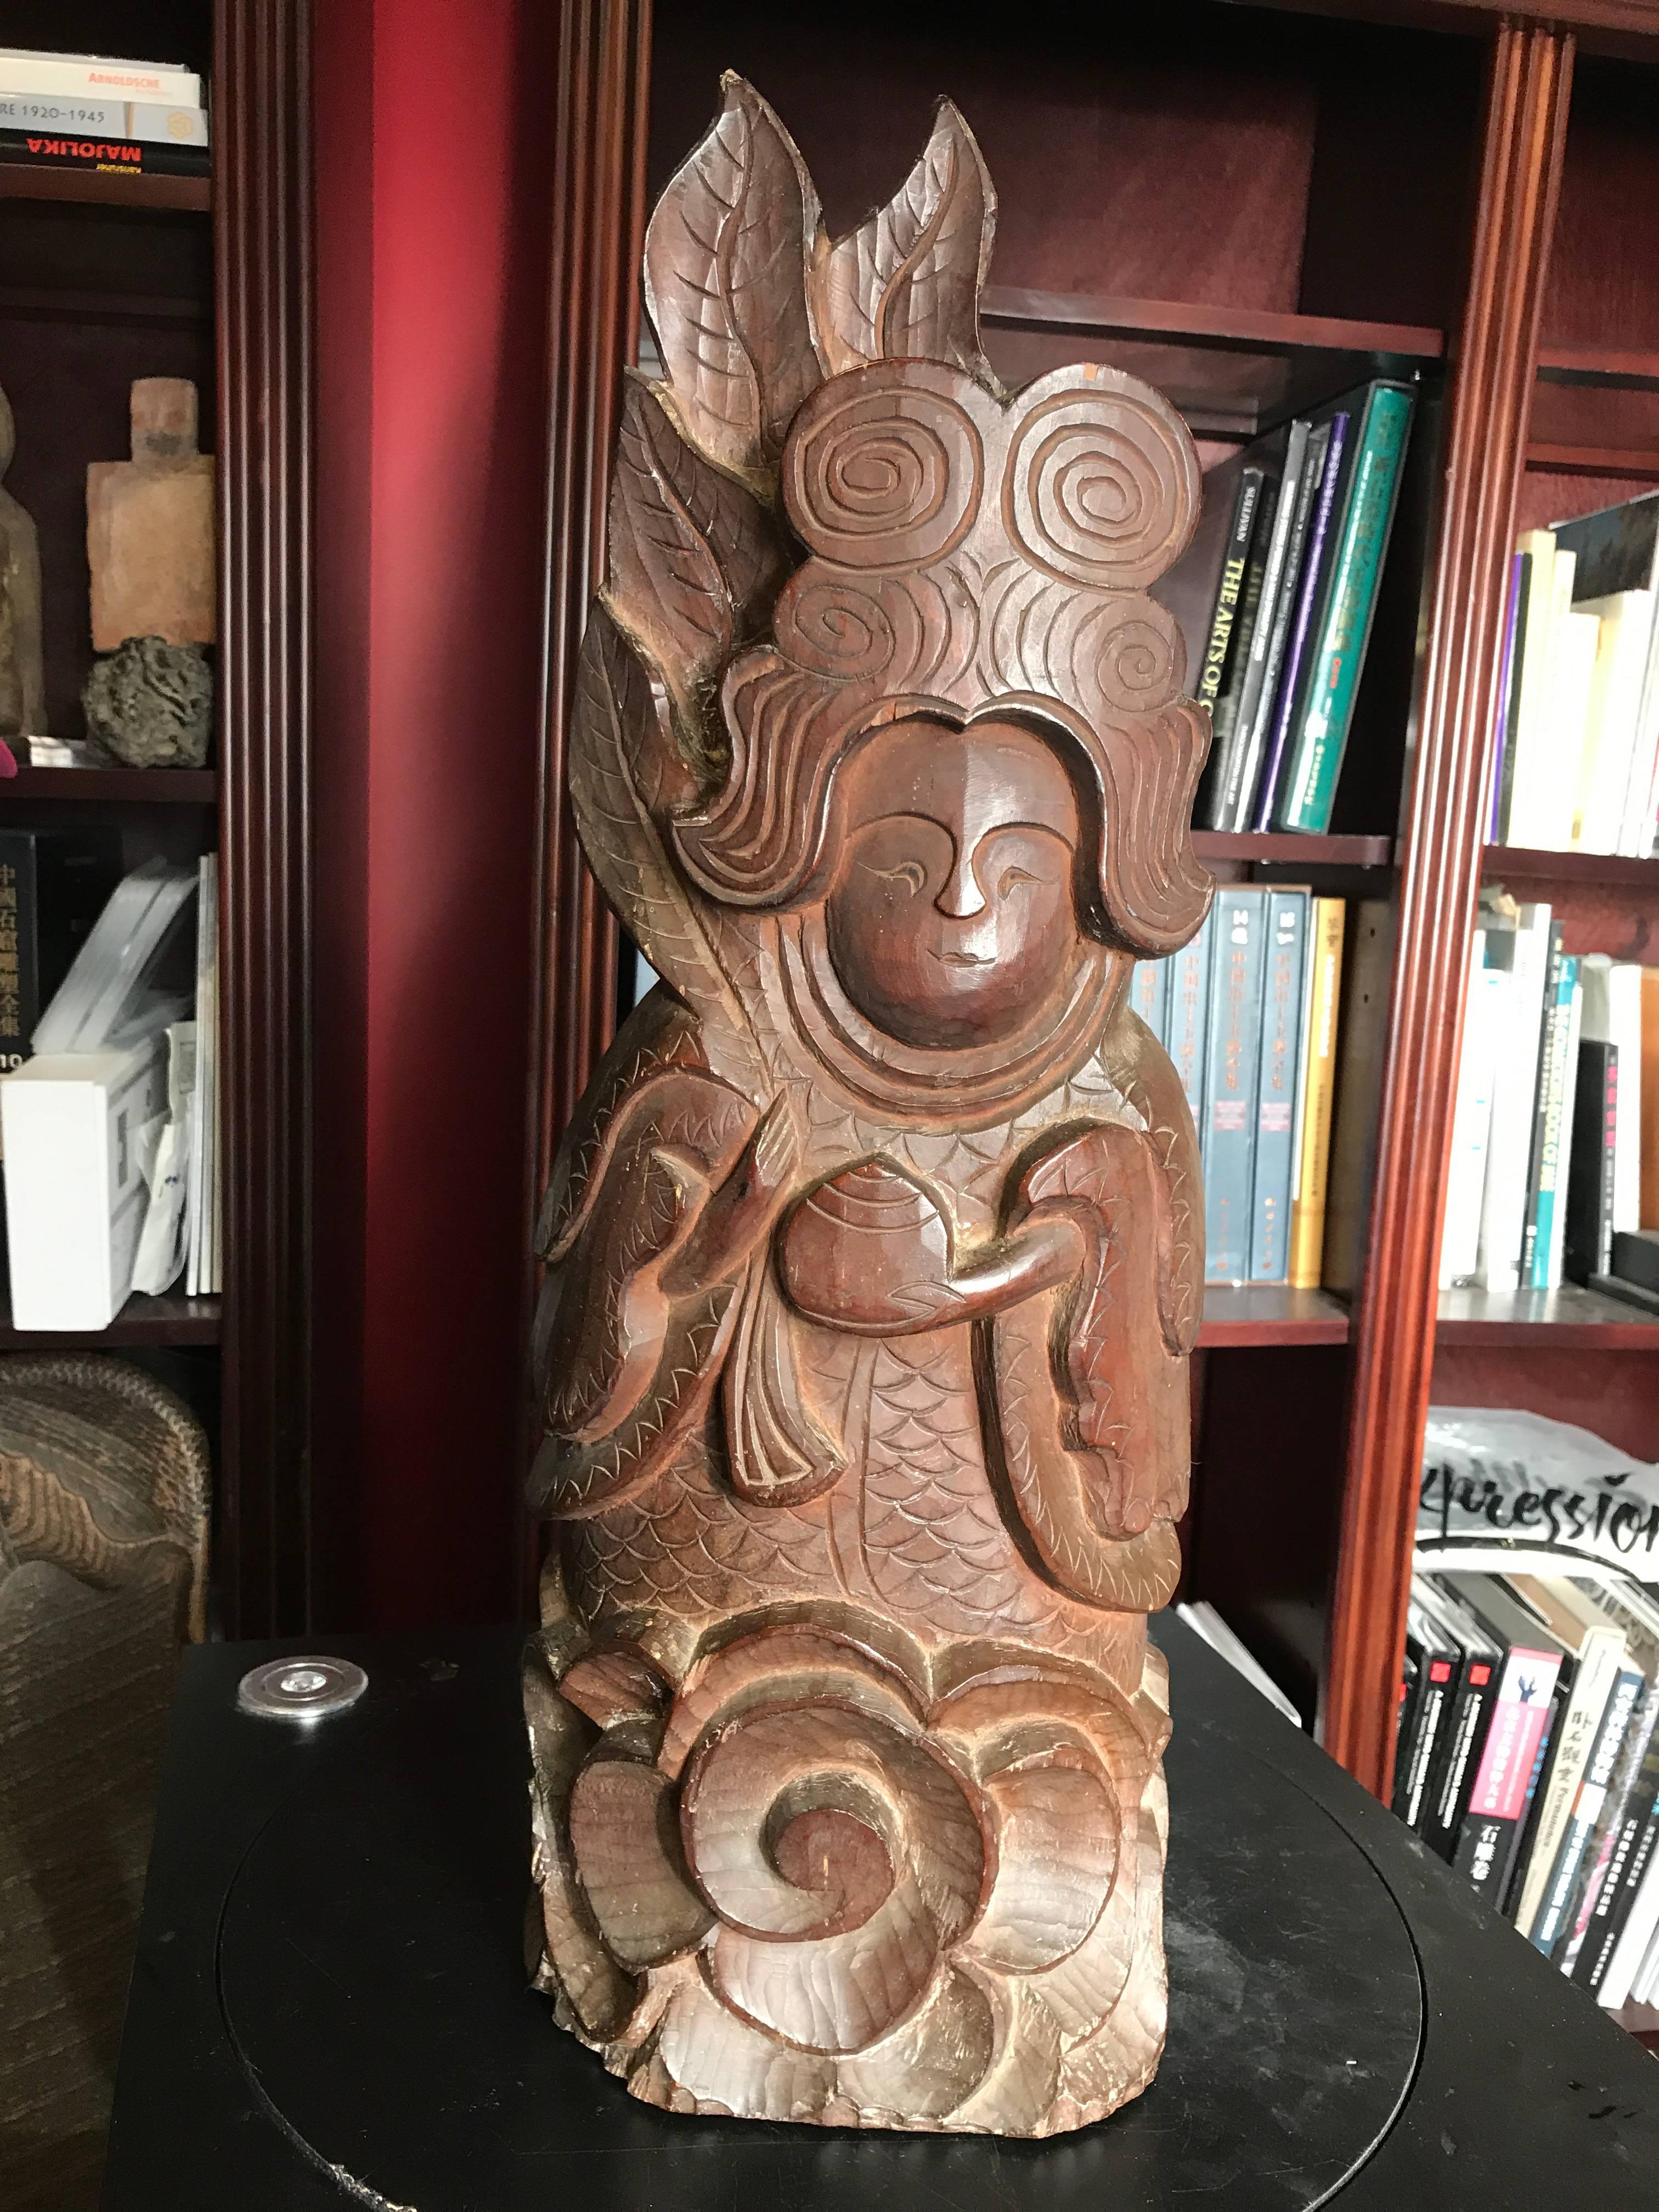 Goddess of Beauty, 26 inches tall

Japanese fine hand-carved image of Kichijoten and monumental painted wood sculpture of Kichijoten holding a jewel or tama, from the early 20th century.

Carved from one block of wood, Kichijoten is the Goddess of